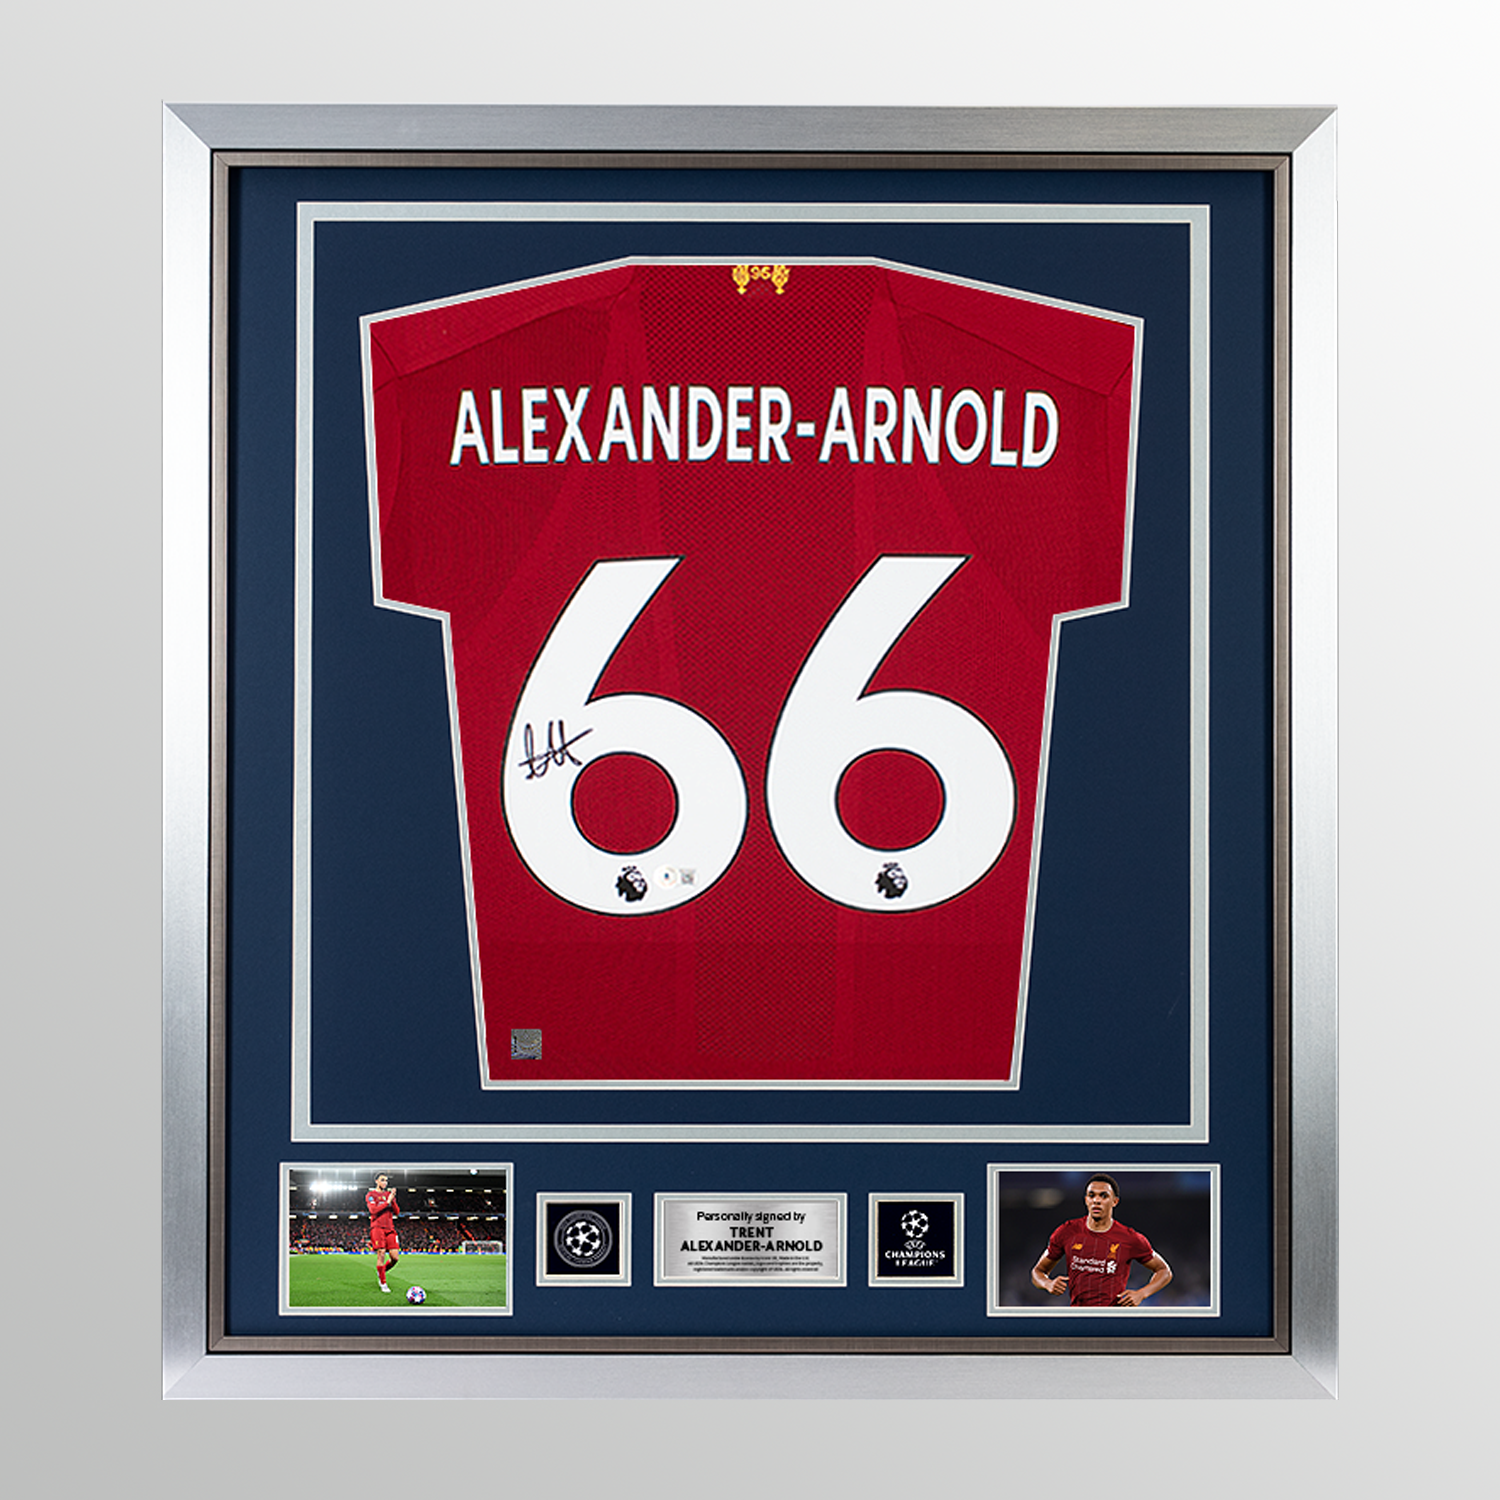 Trent Alexander-Arnold Official UEFA Champions League Back Signed and Framed Liverpool FC 2019-20 Home Shirt UEFA Club Competitions Online Store